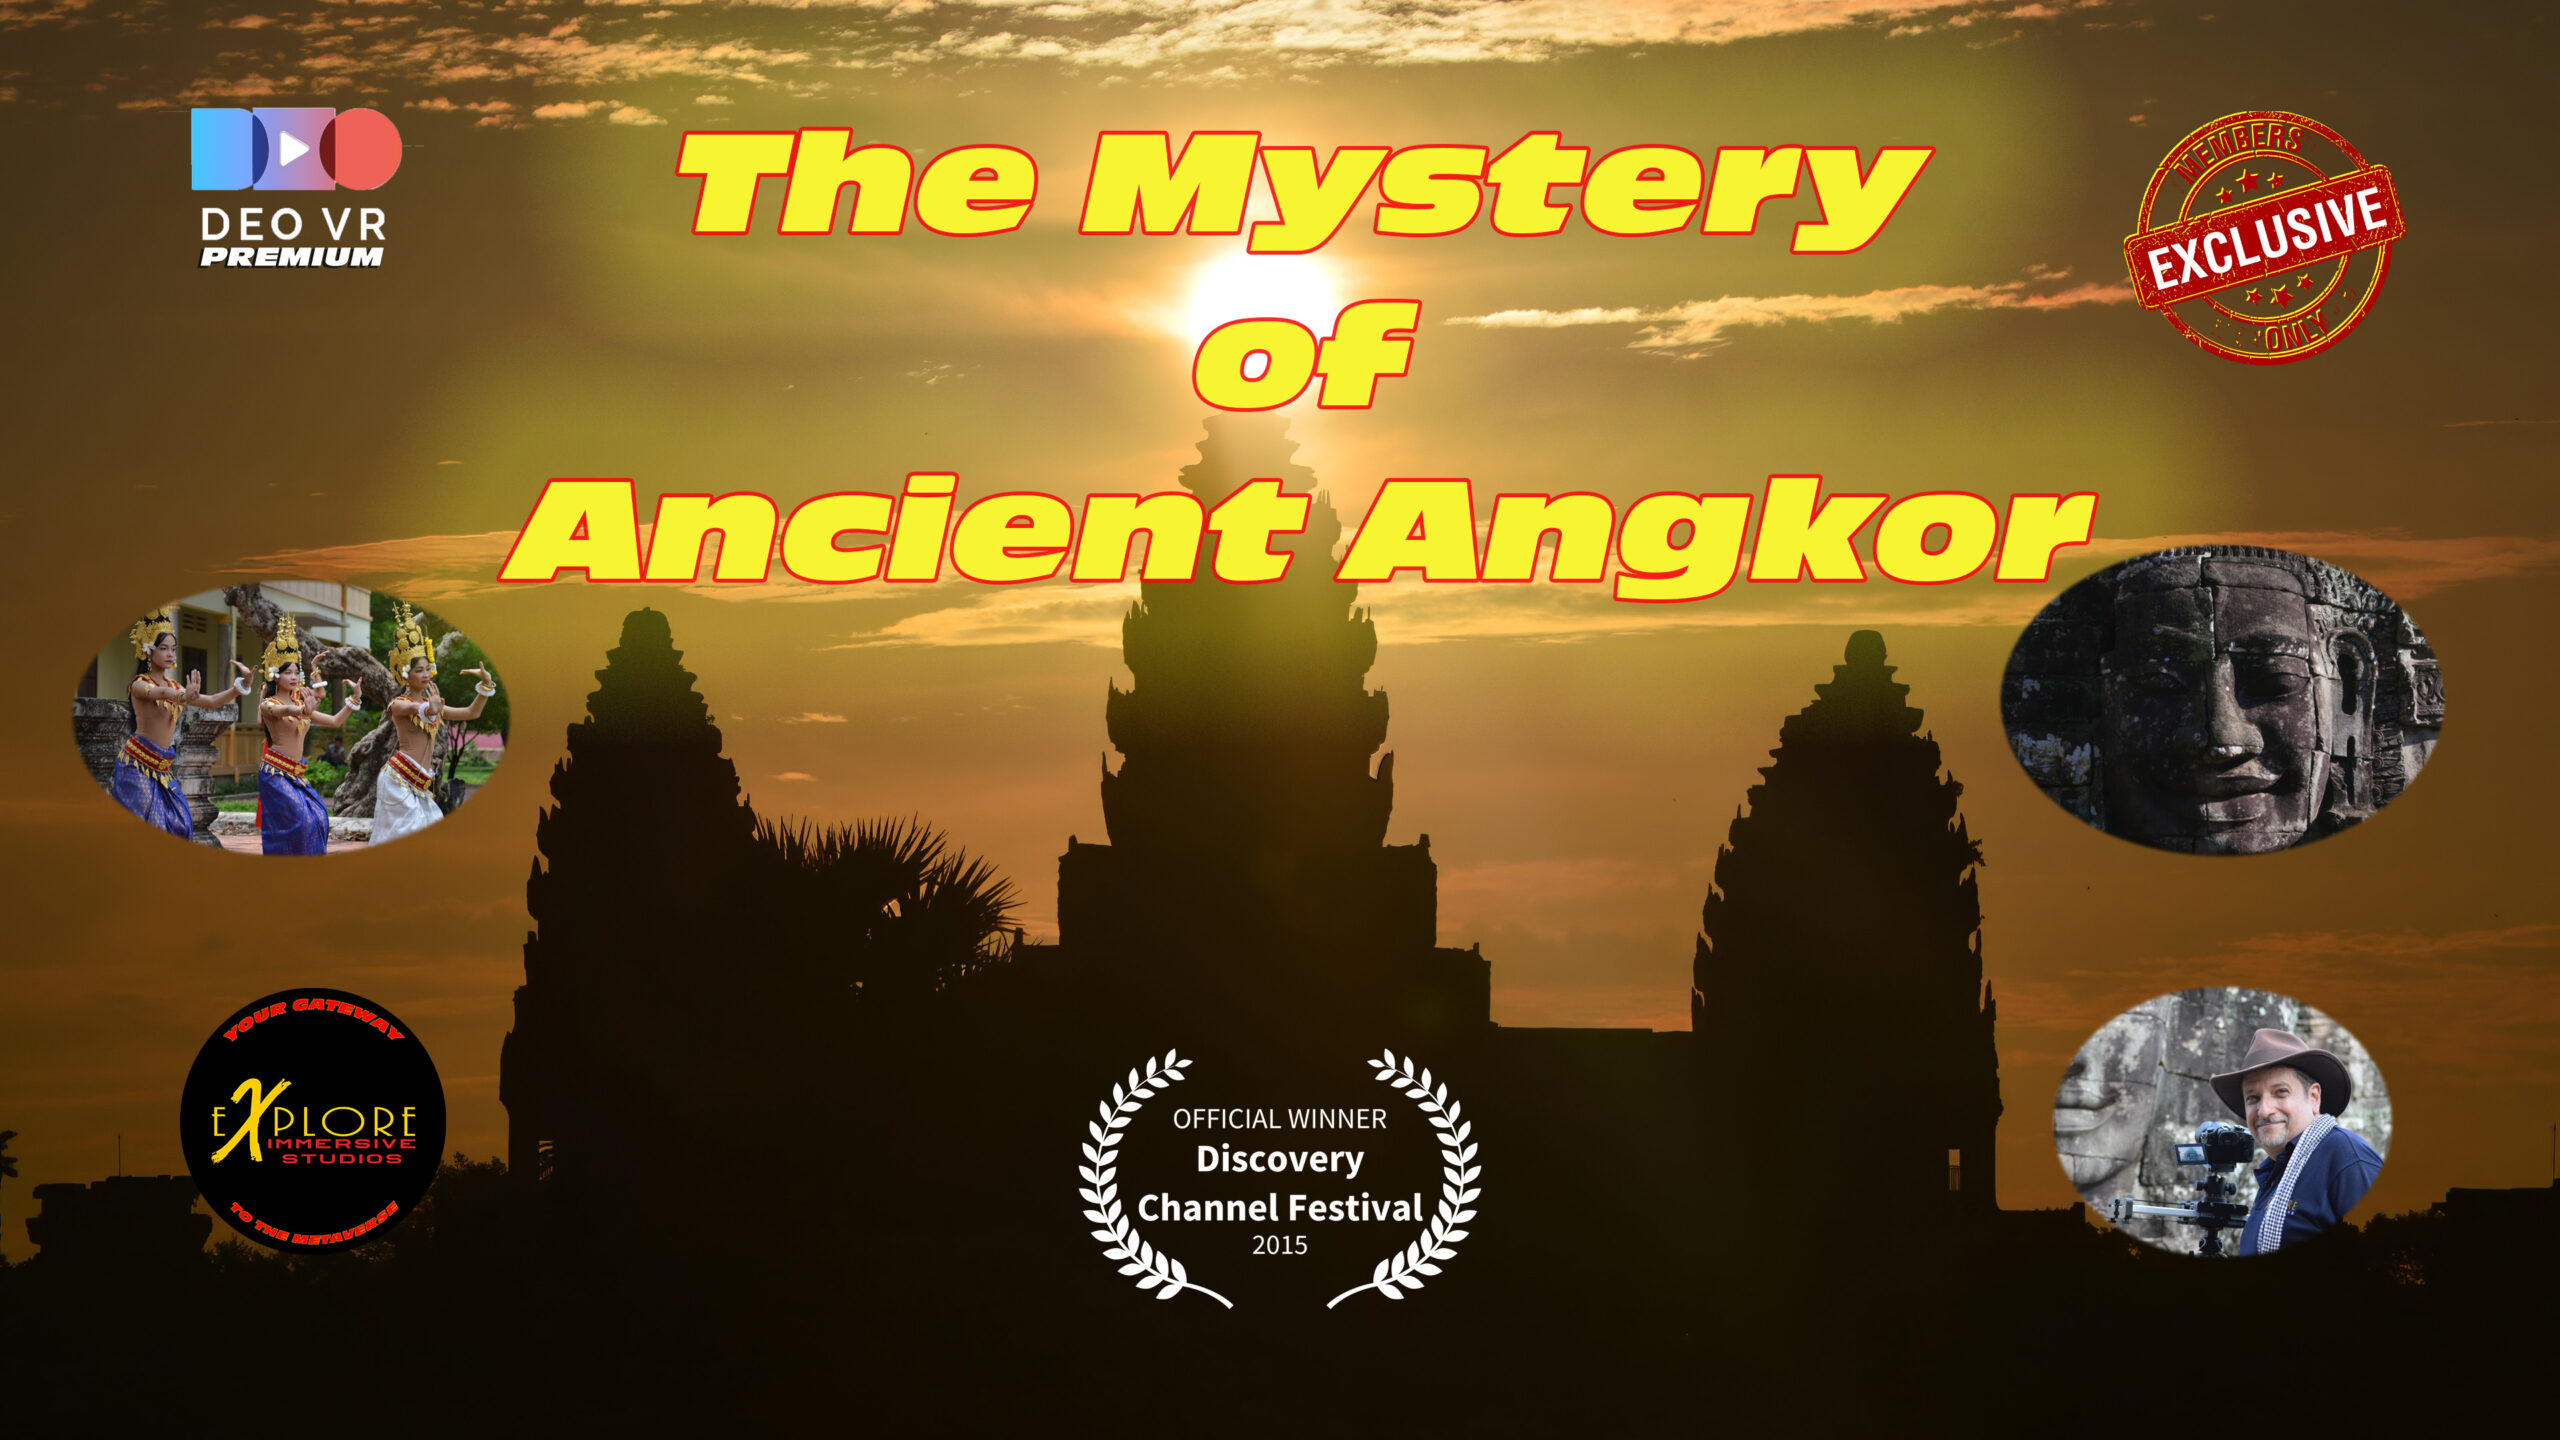 The Mystery of Ancient Angkor Documentary